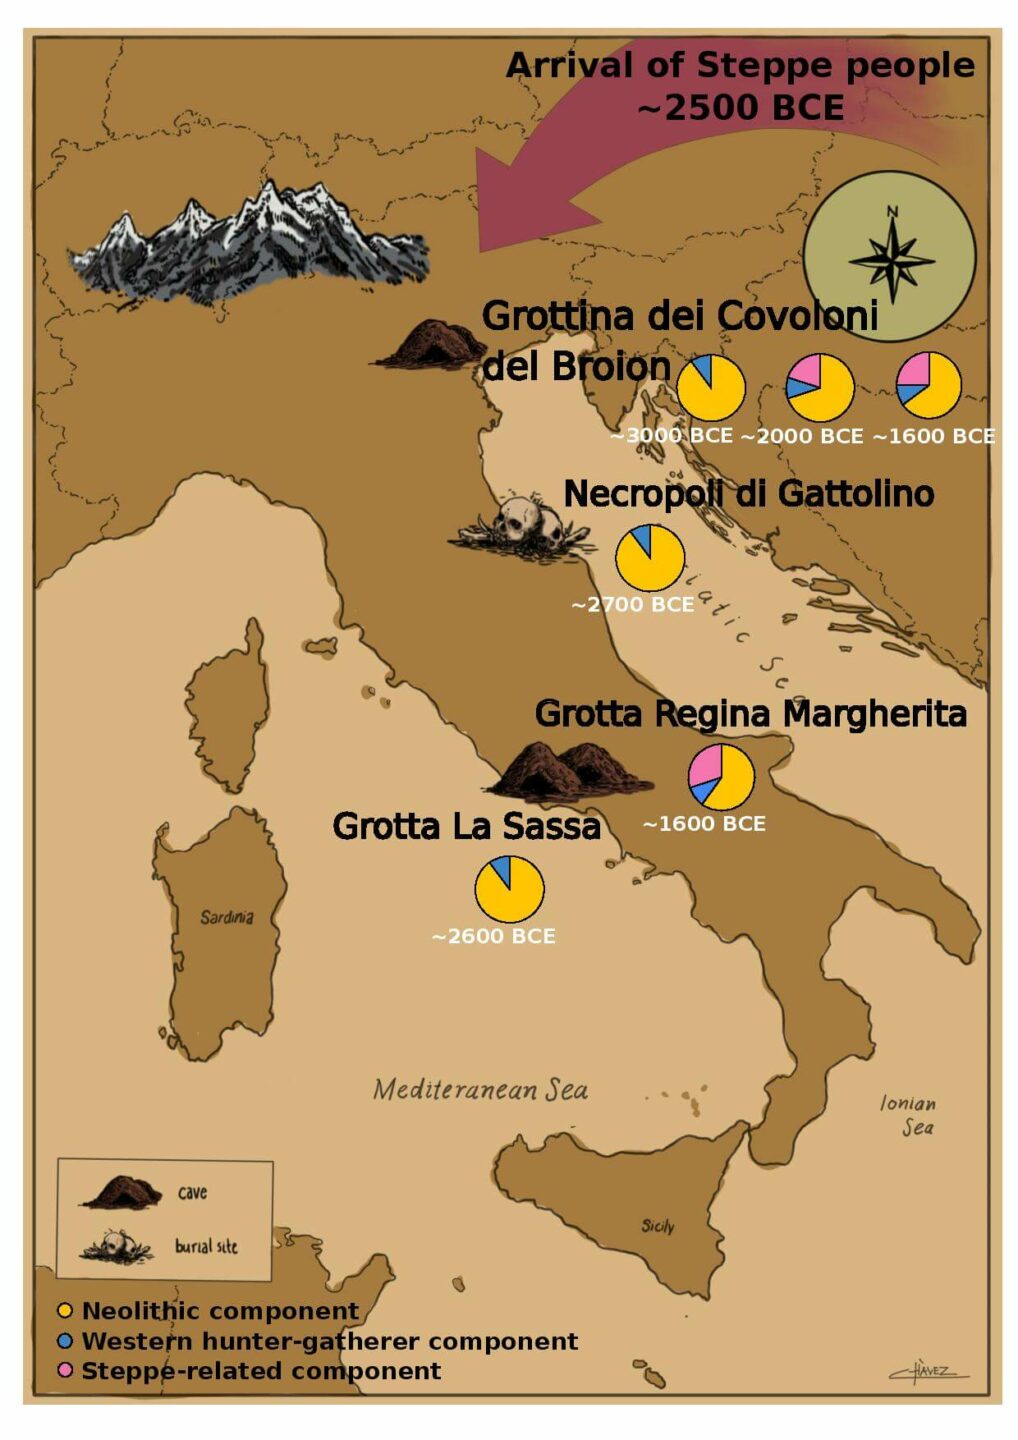 Map showing the arrival of steepe people into ancient italy. Pie charts show the component of dna from different eras/geographies found in each burial site in the study. 3 pie charts have a steppe component. 3 do not.